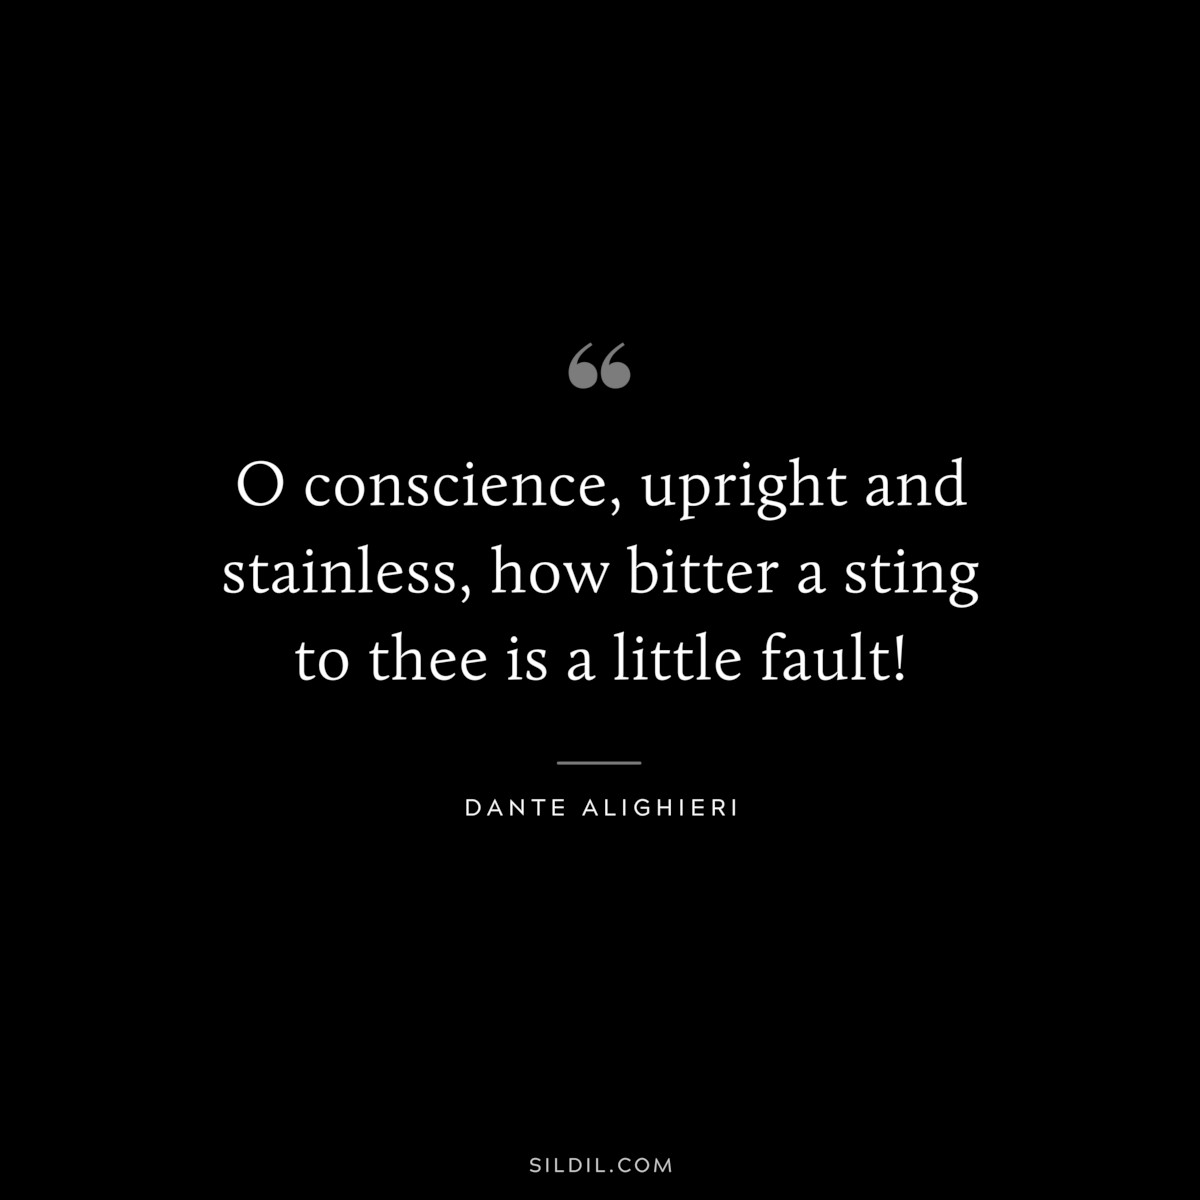 O conscience, upright and stainless, how bitter a sting to thee is a little fault! ― Dante Alighieri